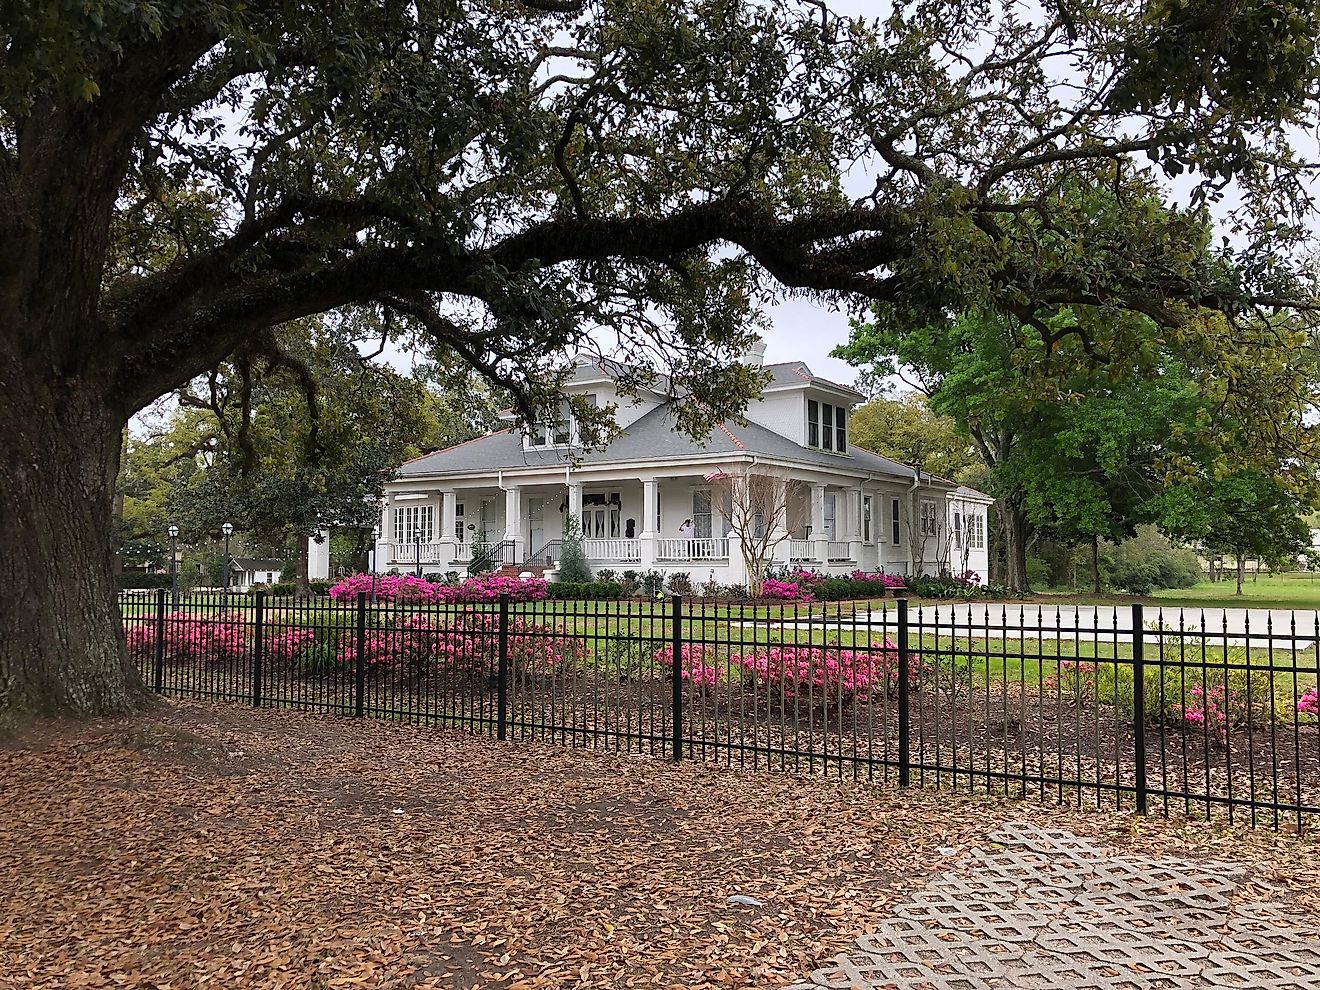 A picturesque old house in Slidell, Louisiana, embodying the classic charm of the American South.